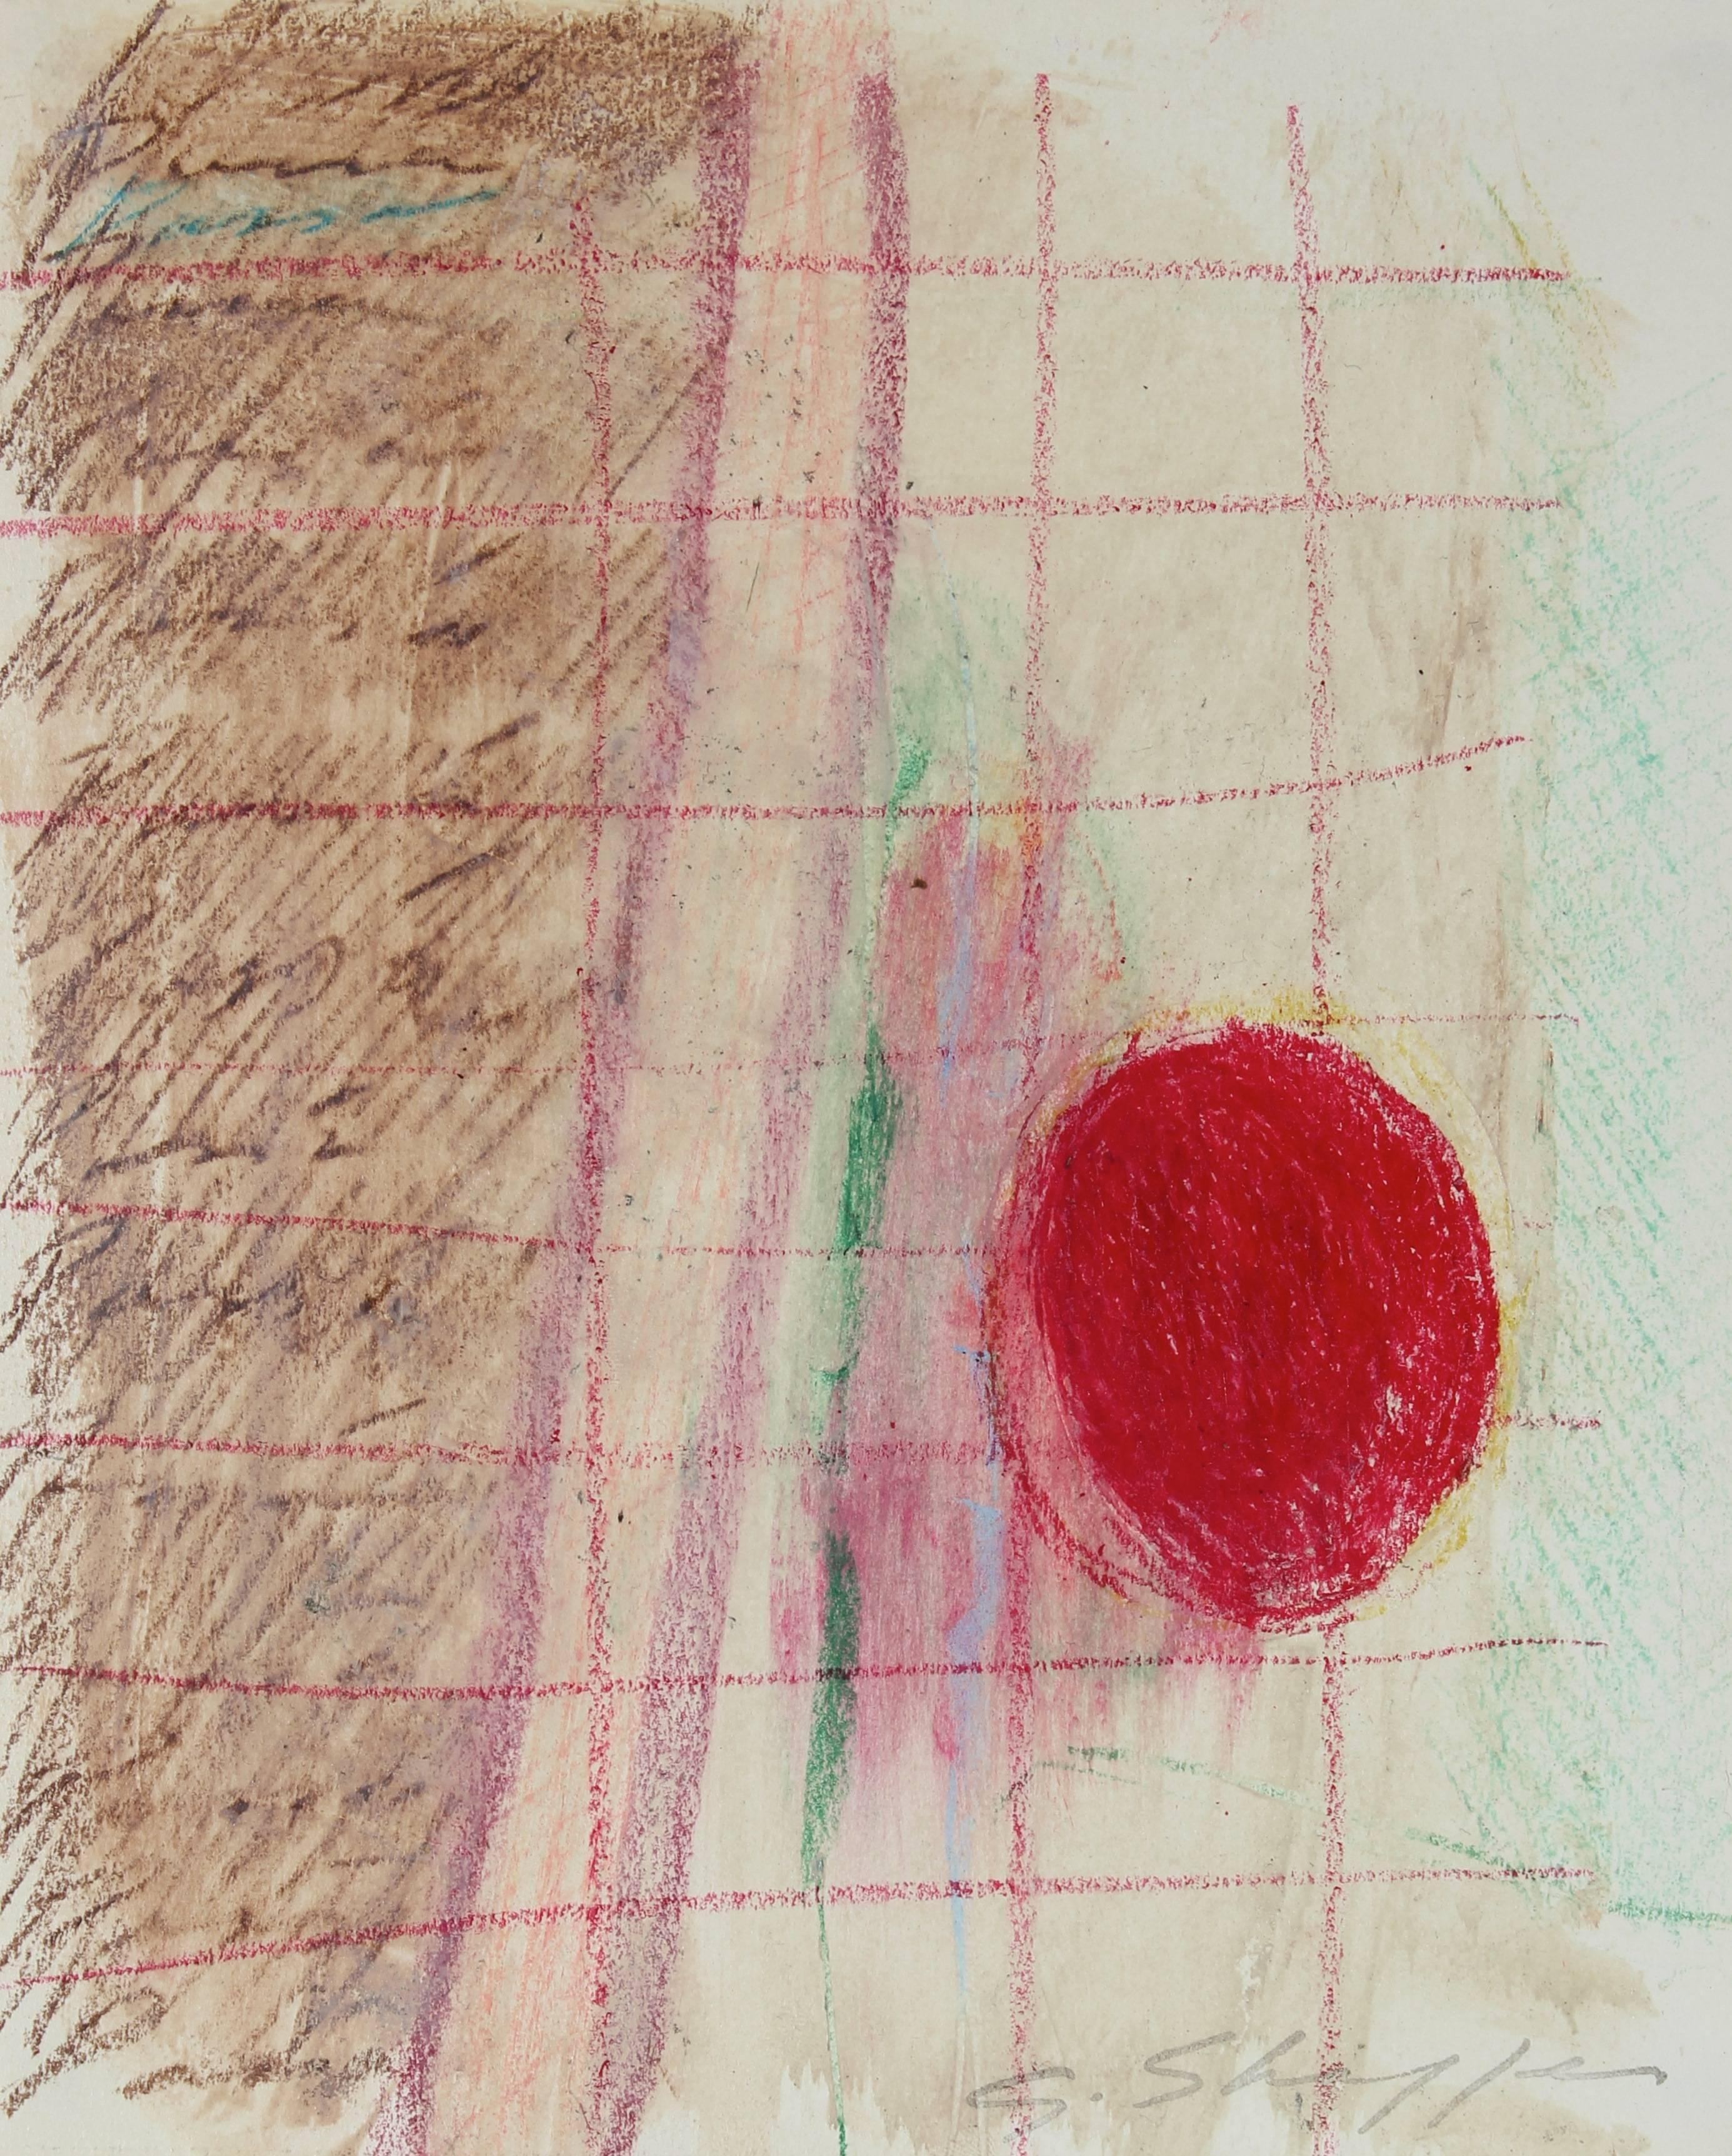 Gary Lee Shaffer Abstract Drawing – Abstrakt-expressionistische Studie in Pastell, 1970